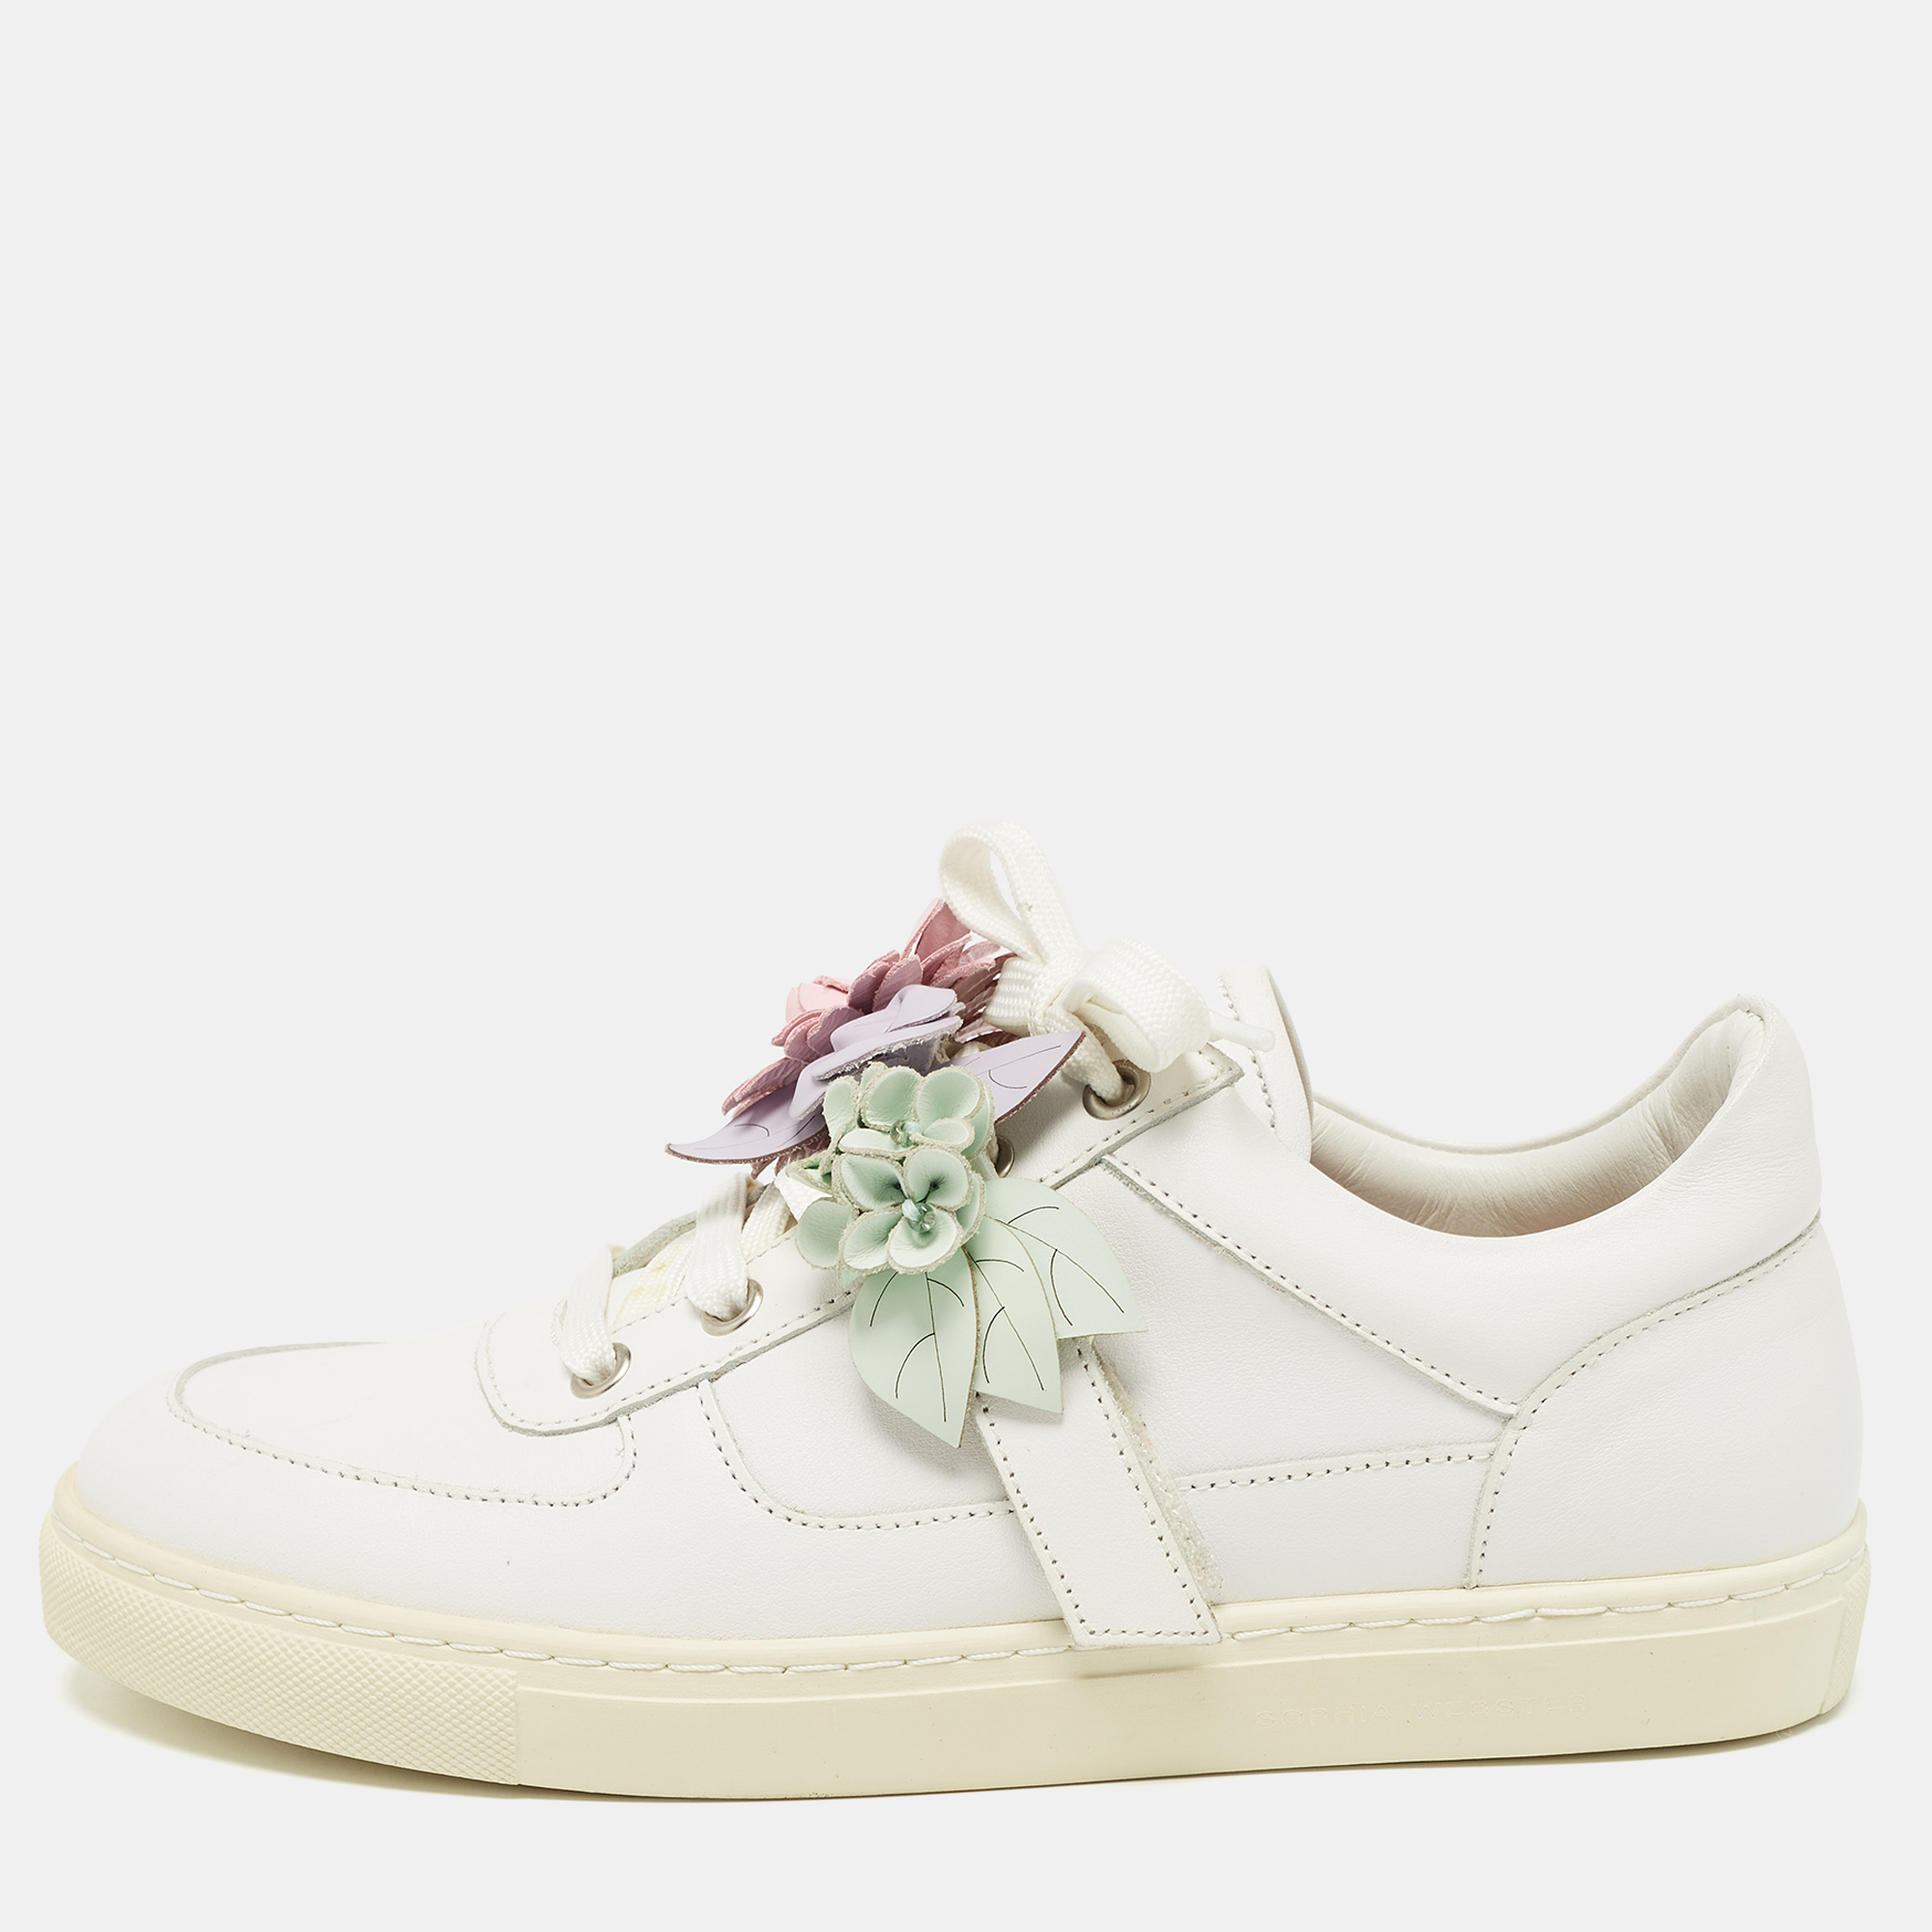 Sophia webster white leather lilico flower sneakers size 39